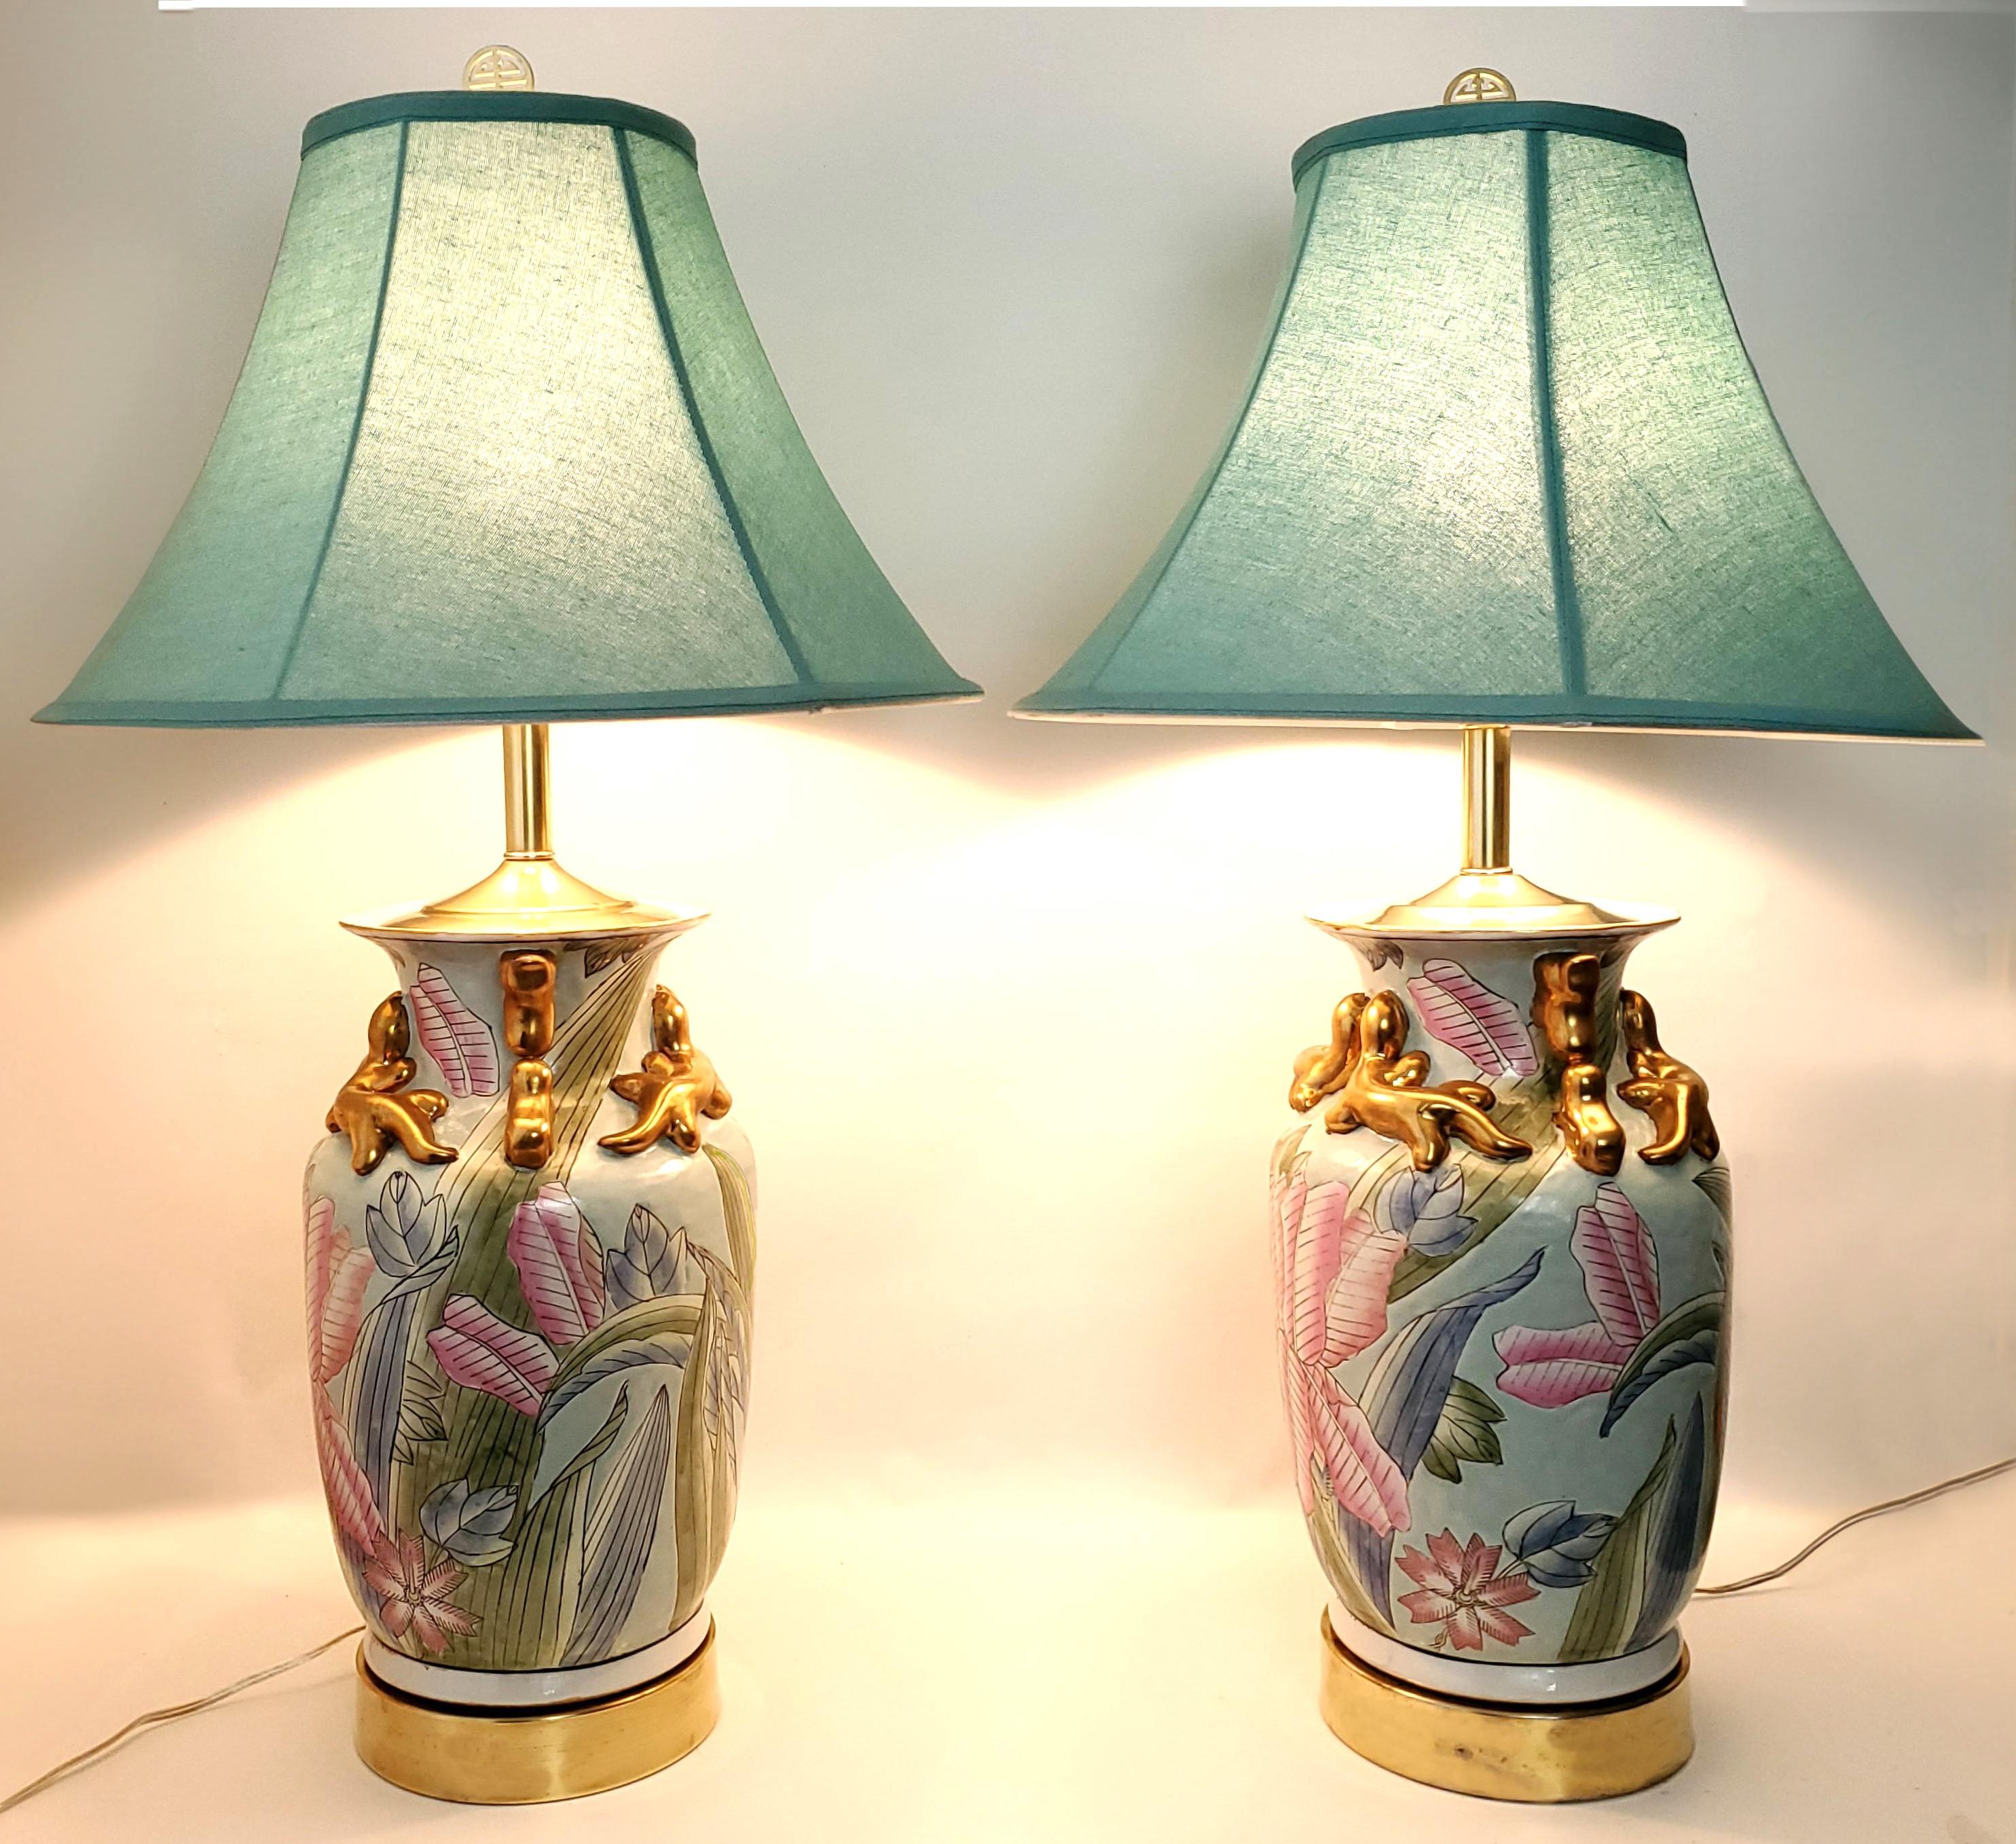 Vintage Chinese Porcelain Pastel Tobacco Leaf Table Lamps with Turquoise Shades For Sale 5